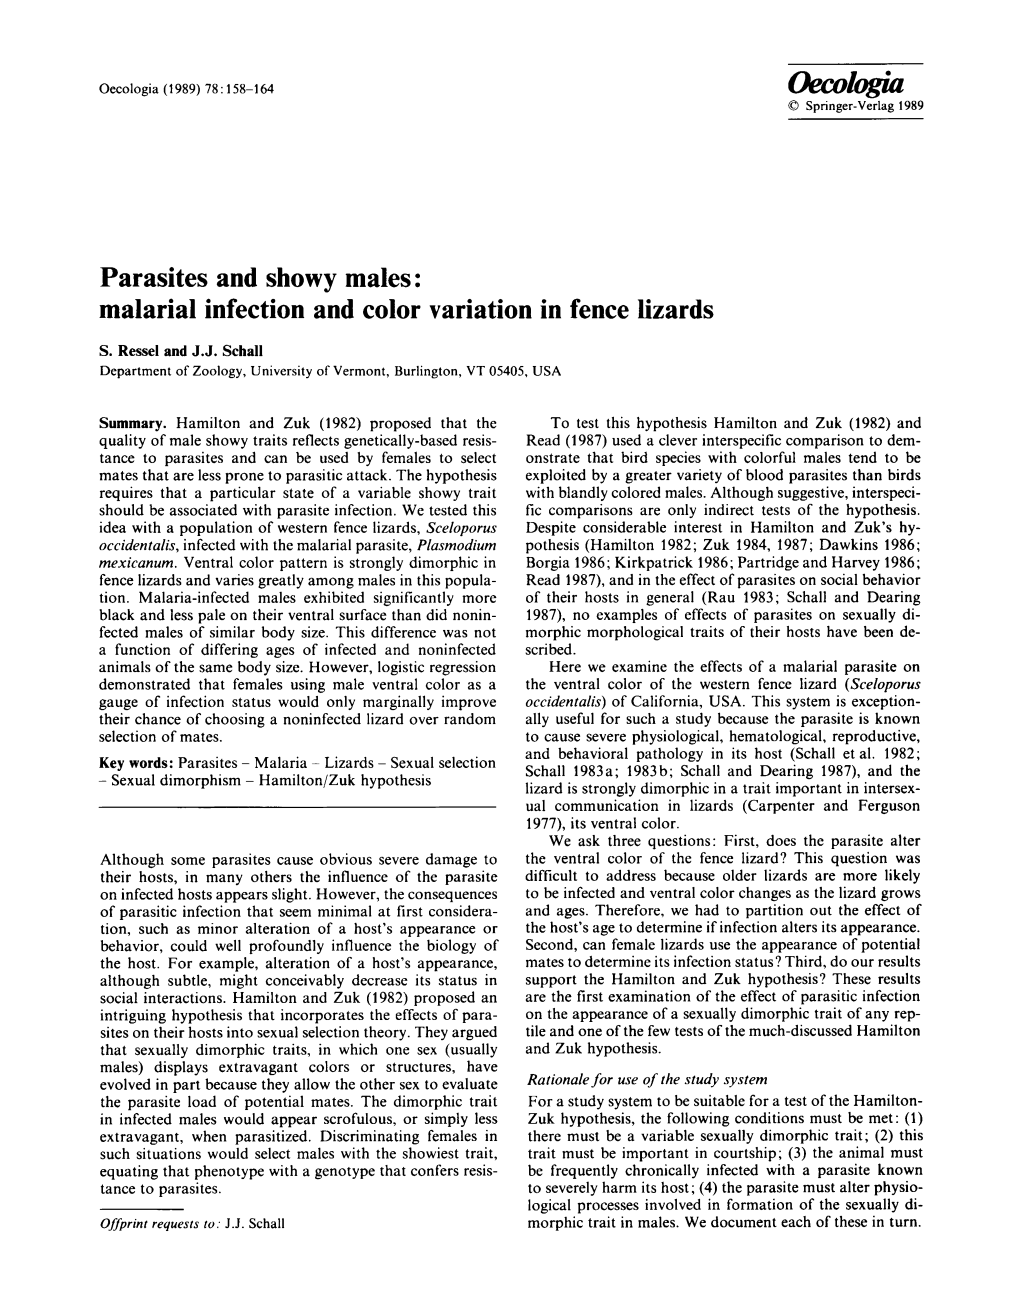 Parasites and Showy Males: Malarial Infection and Color Variation in Fence Lizards